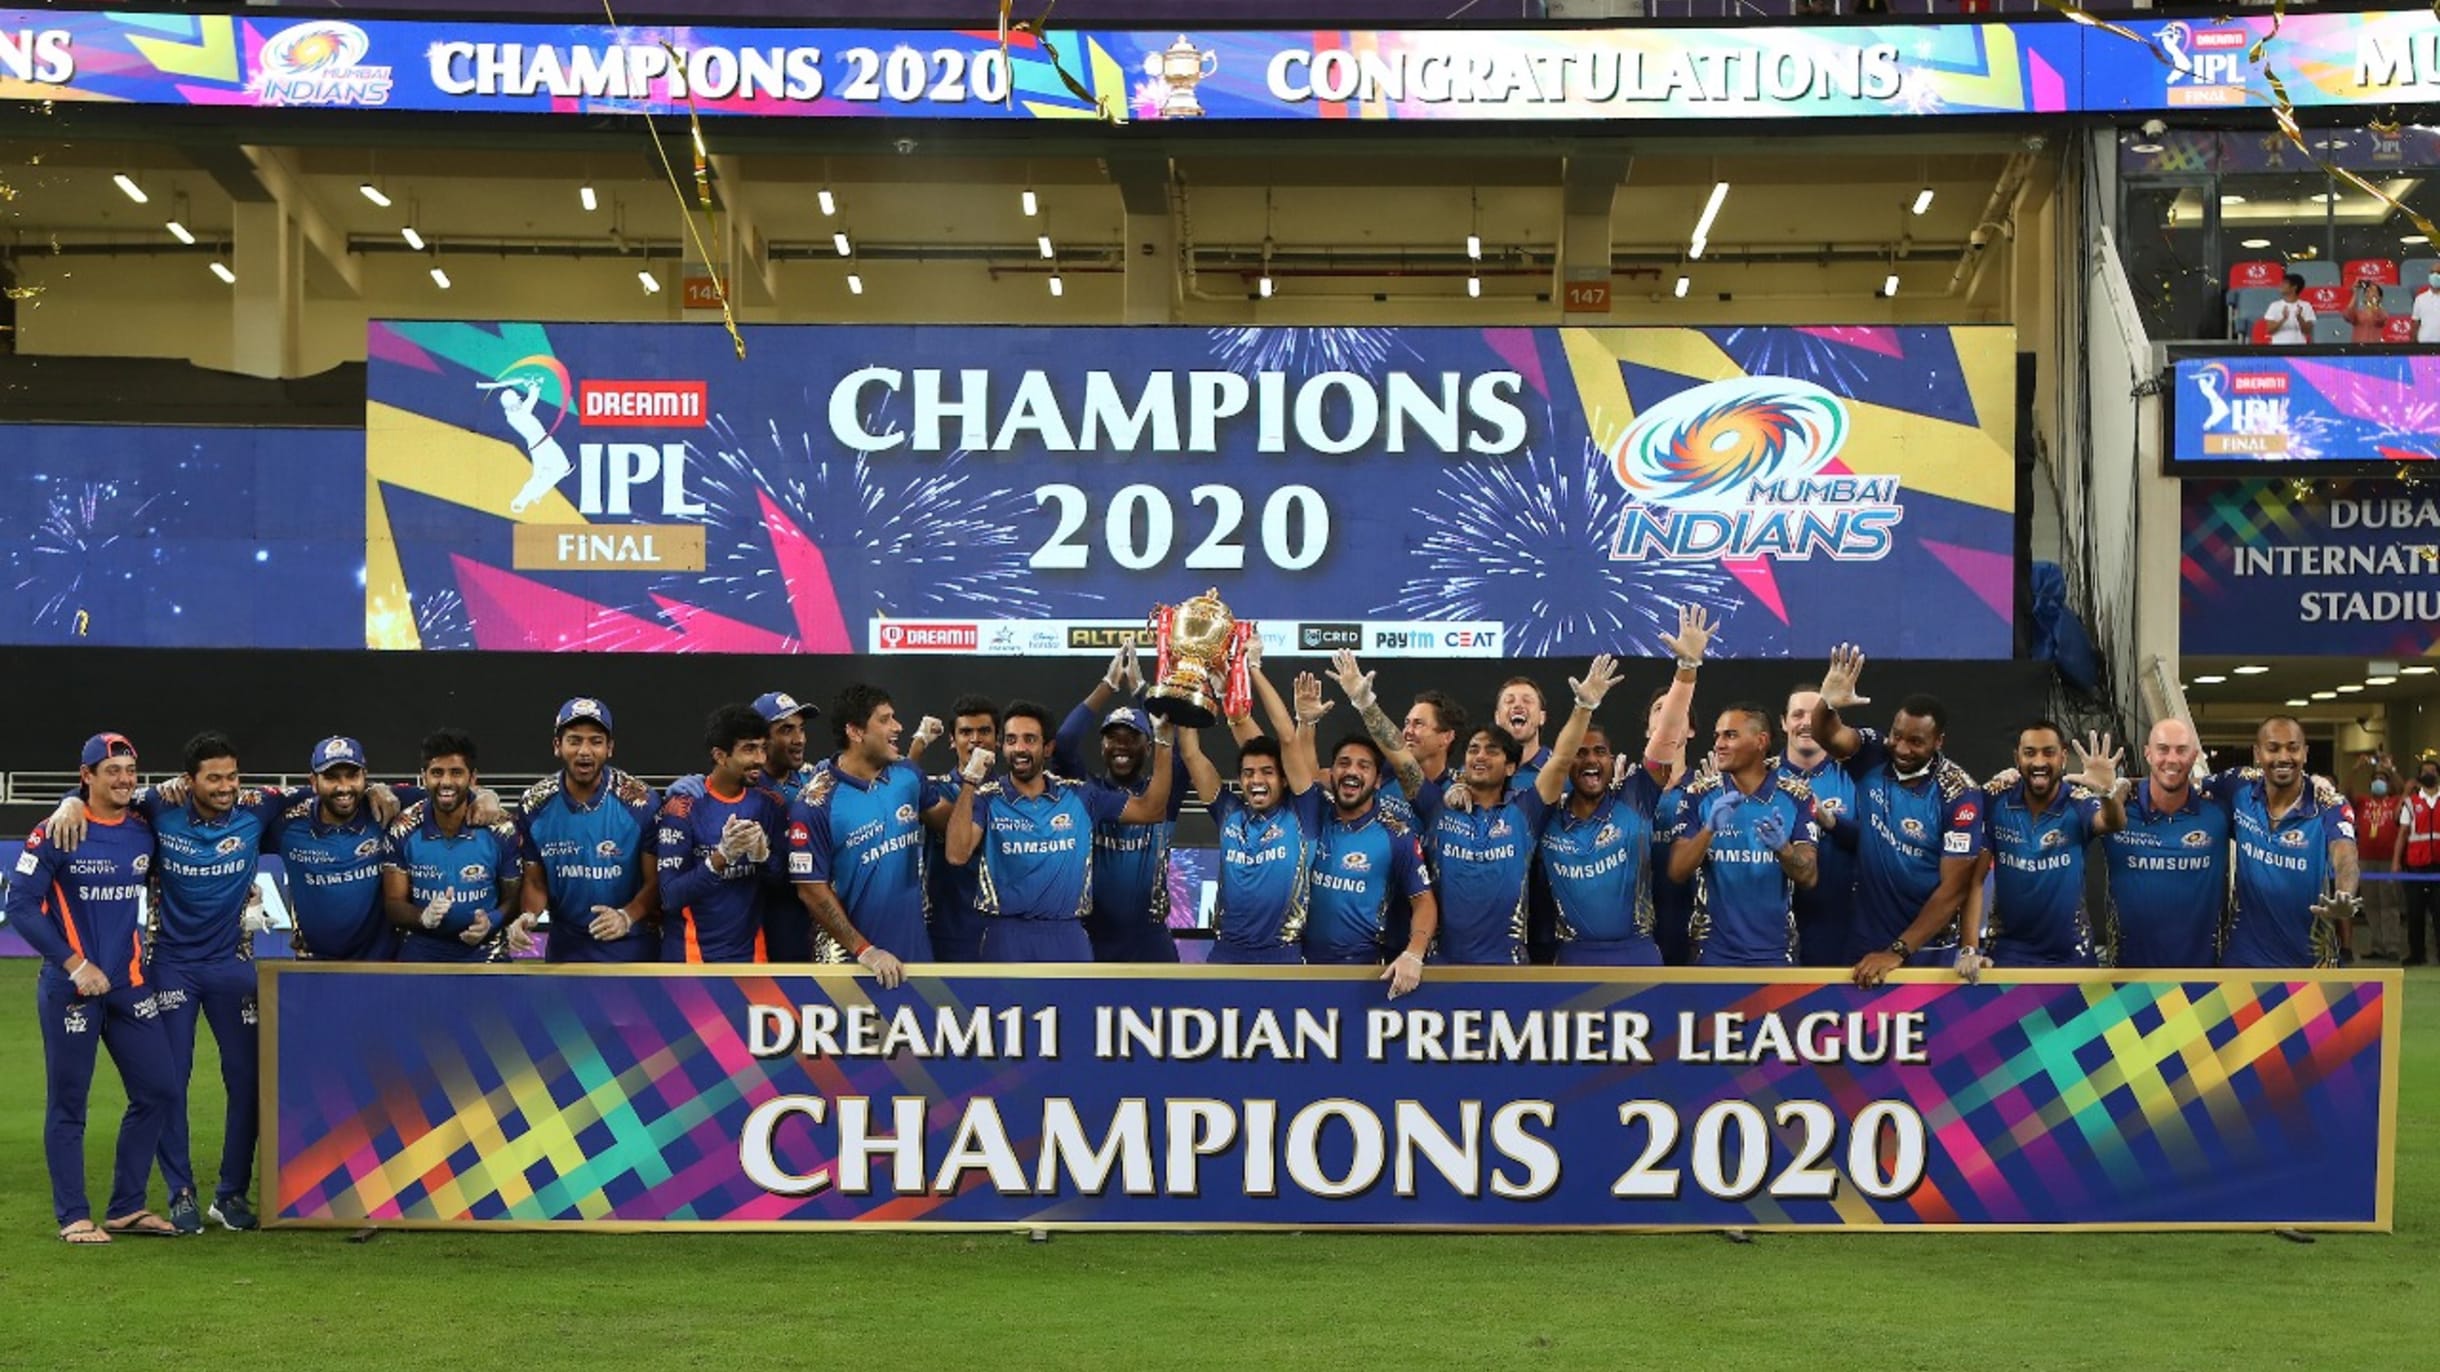 Mumbai Indians secure fifth entry in IPL winners list with 2020 title